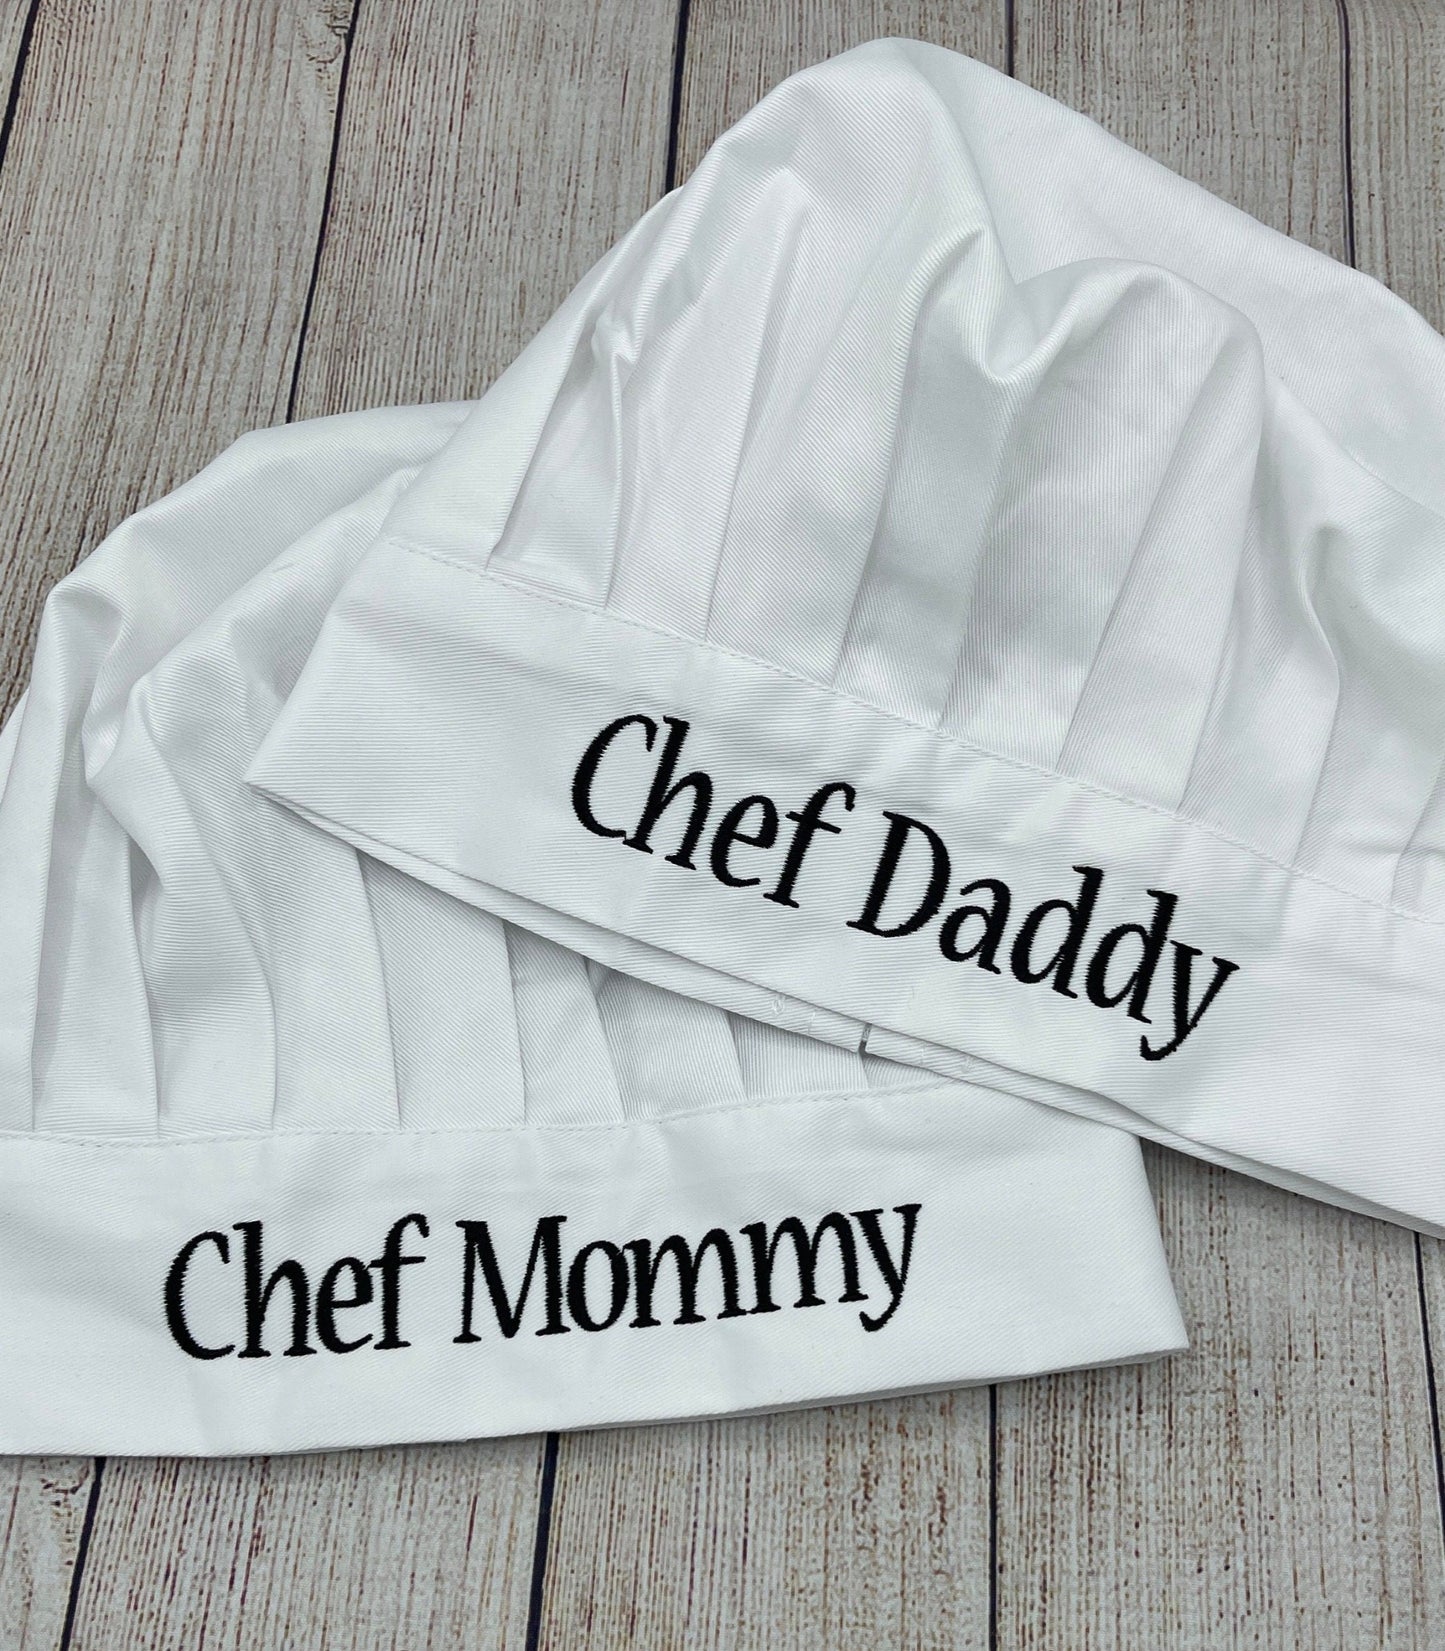 White Chef hats that say chef mommy and chef daddy